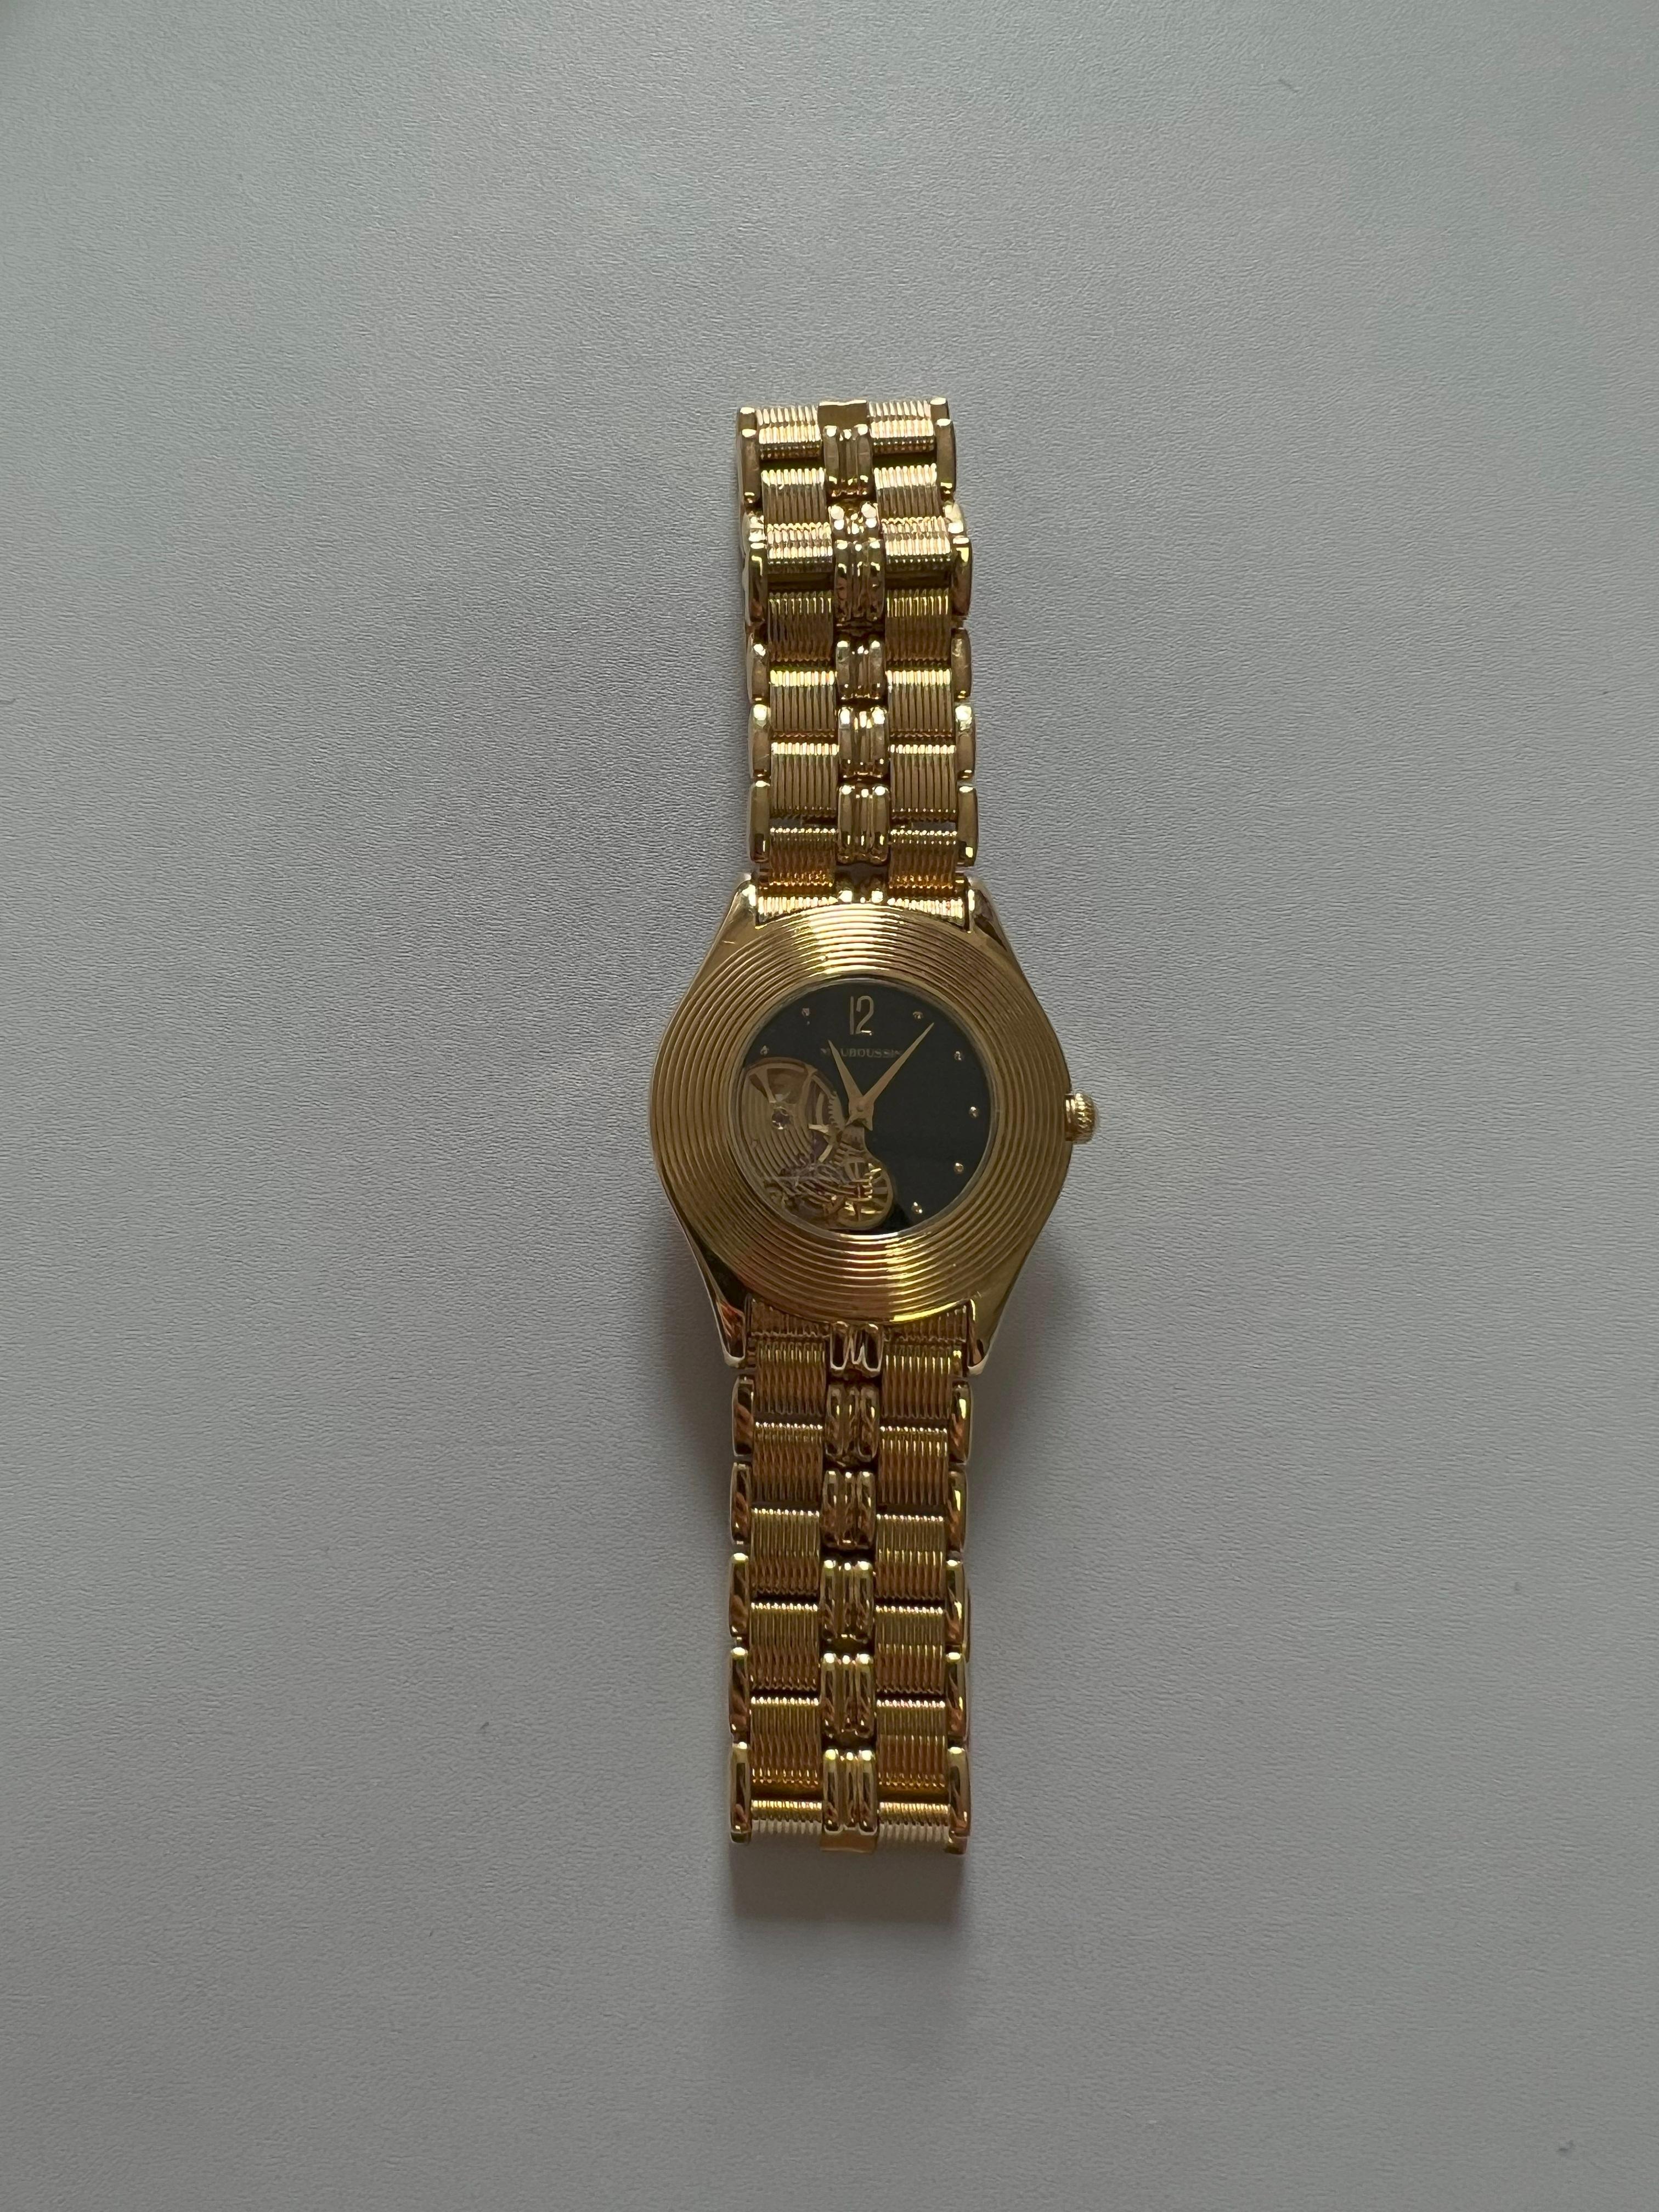 Mauboussin Watch - 18K Yellow Gold - Weight 111.87 Grams - 7.7 inches length - 34mm Dial Diameter - Circa 1990s
Please take a close look at the dial and backside photos for all engravings and hallmarks. 